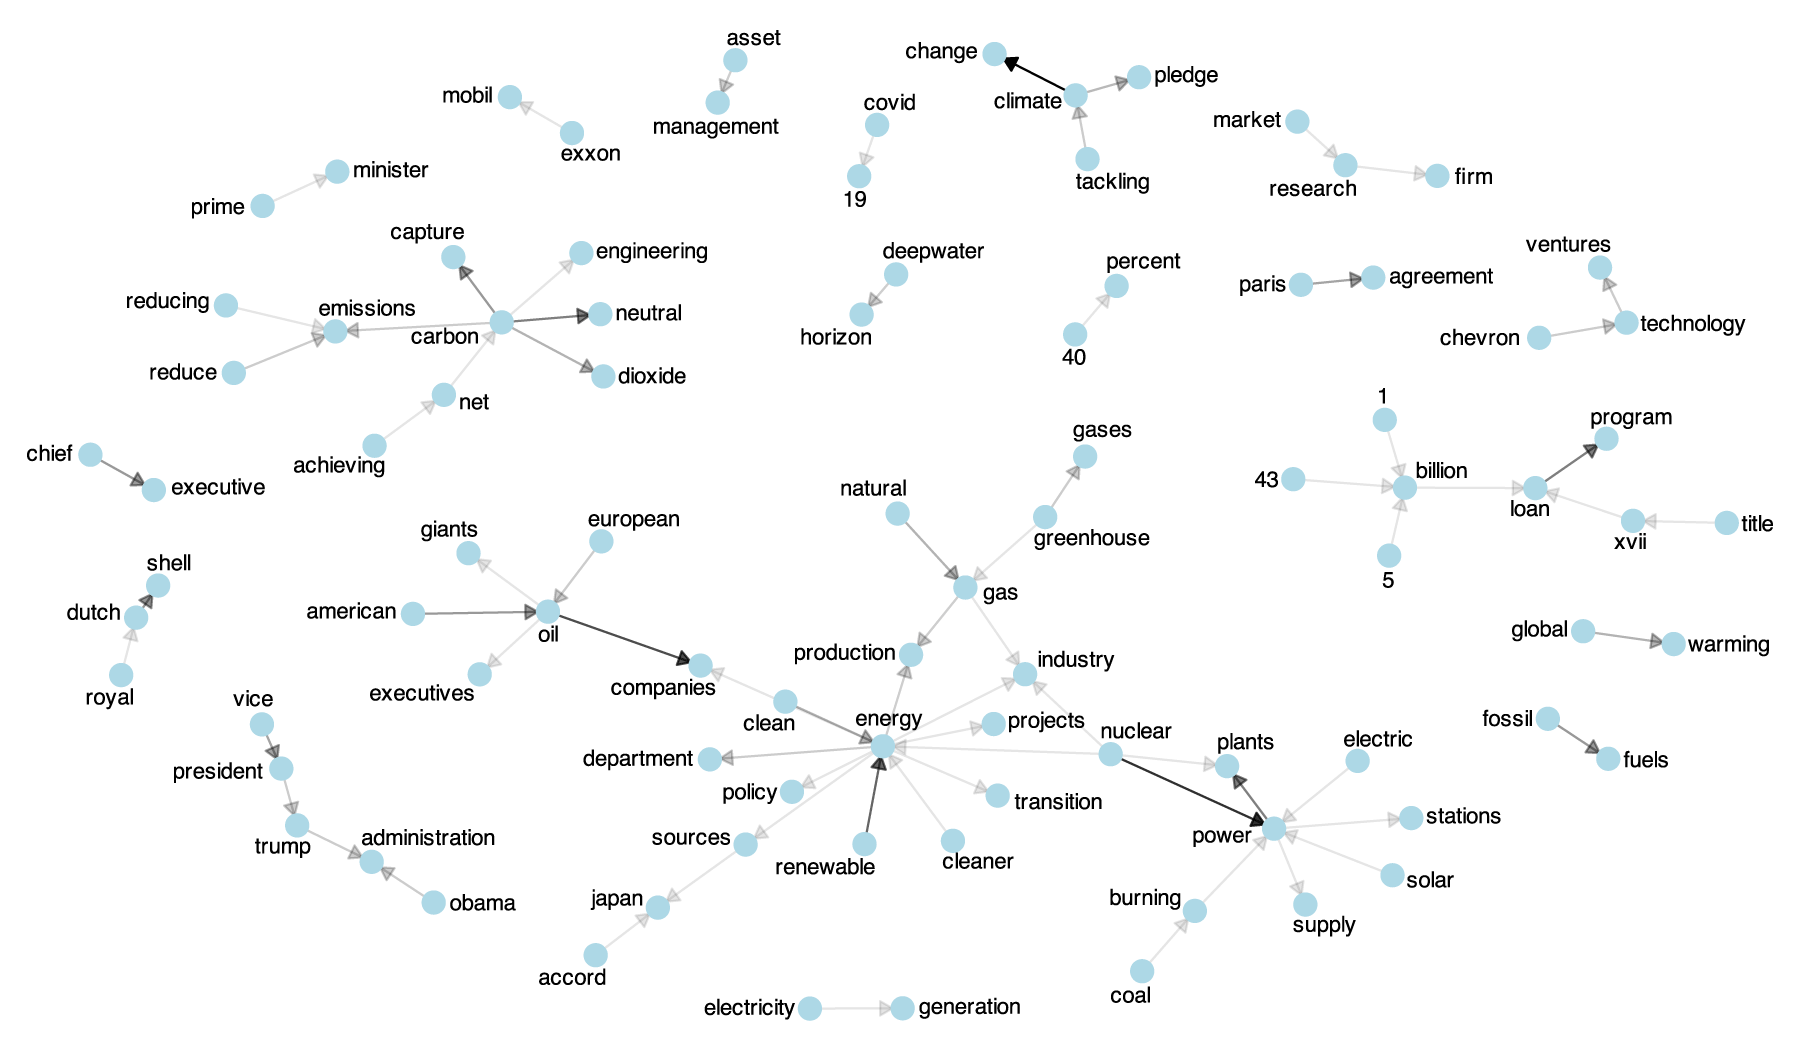 Network map of topics discussed in the news media in 2020